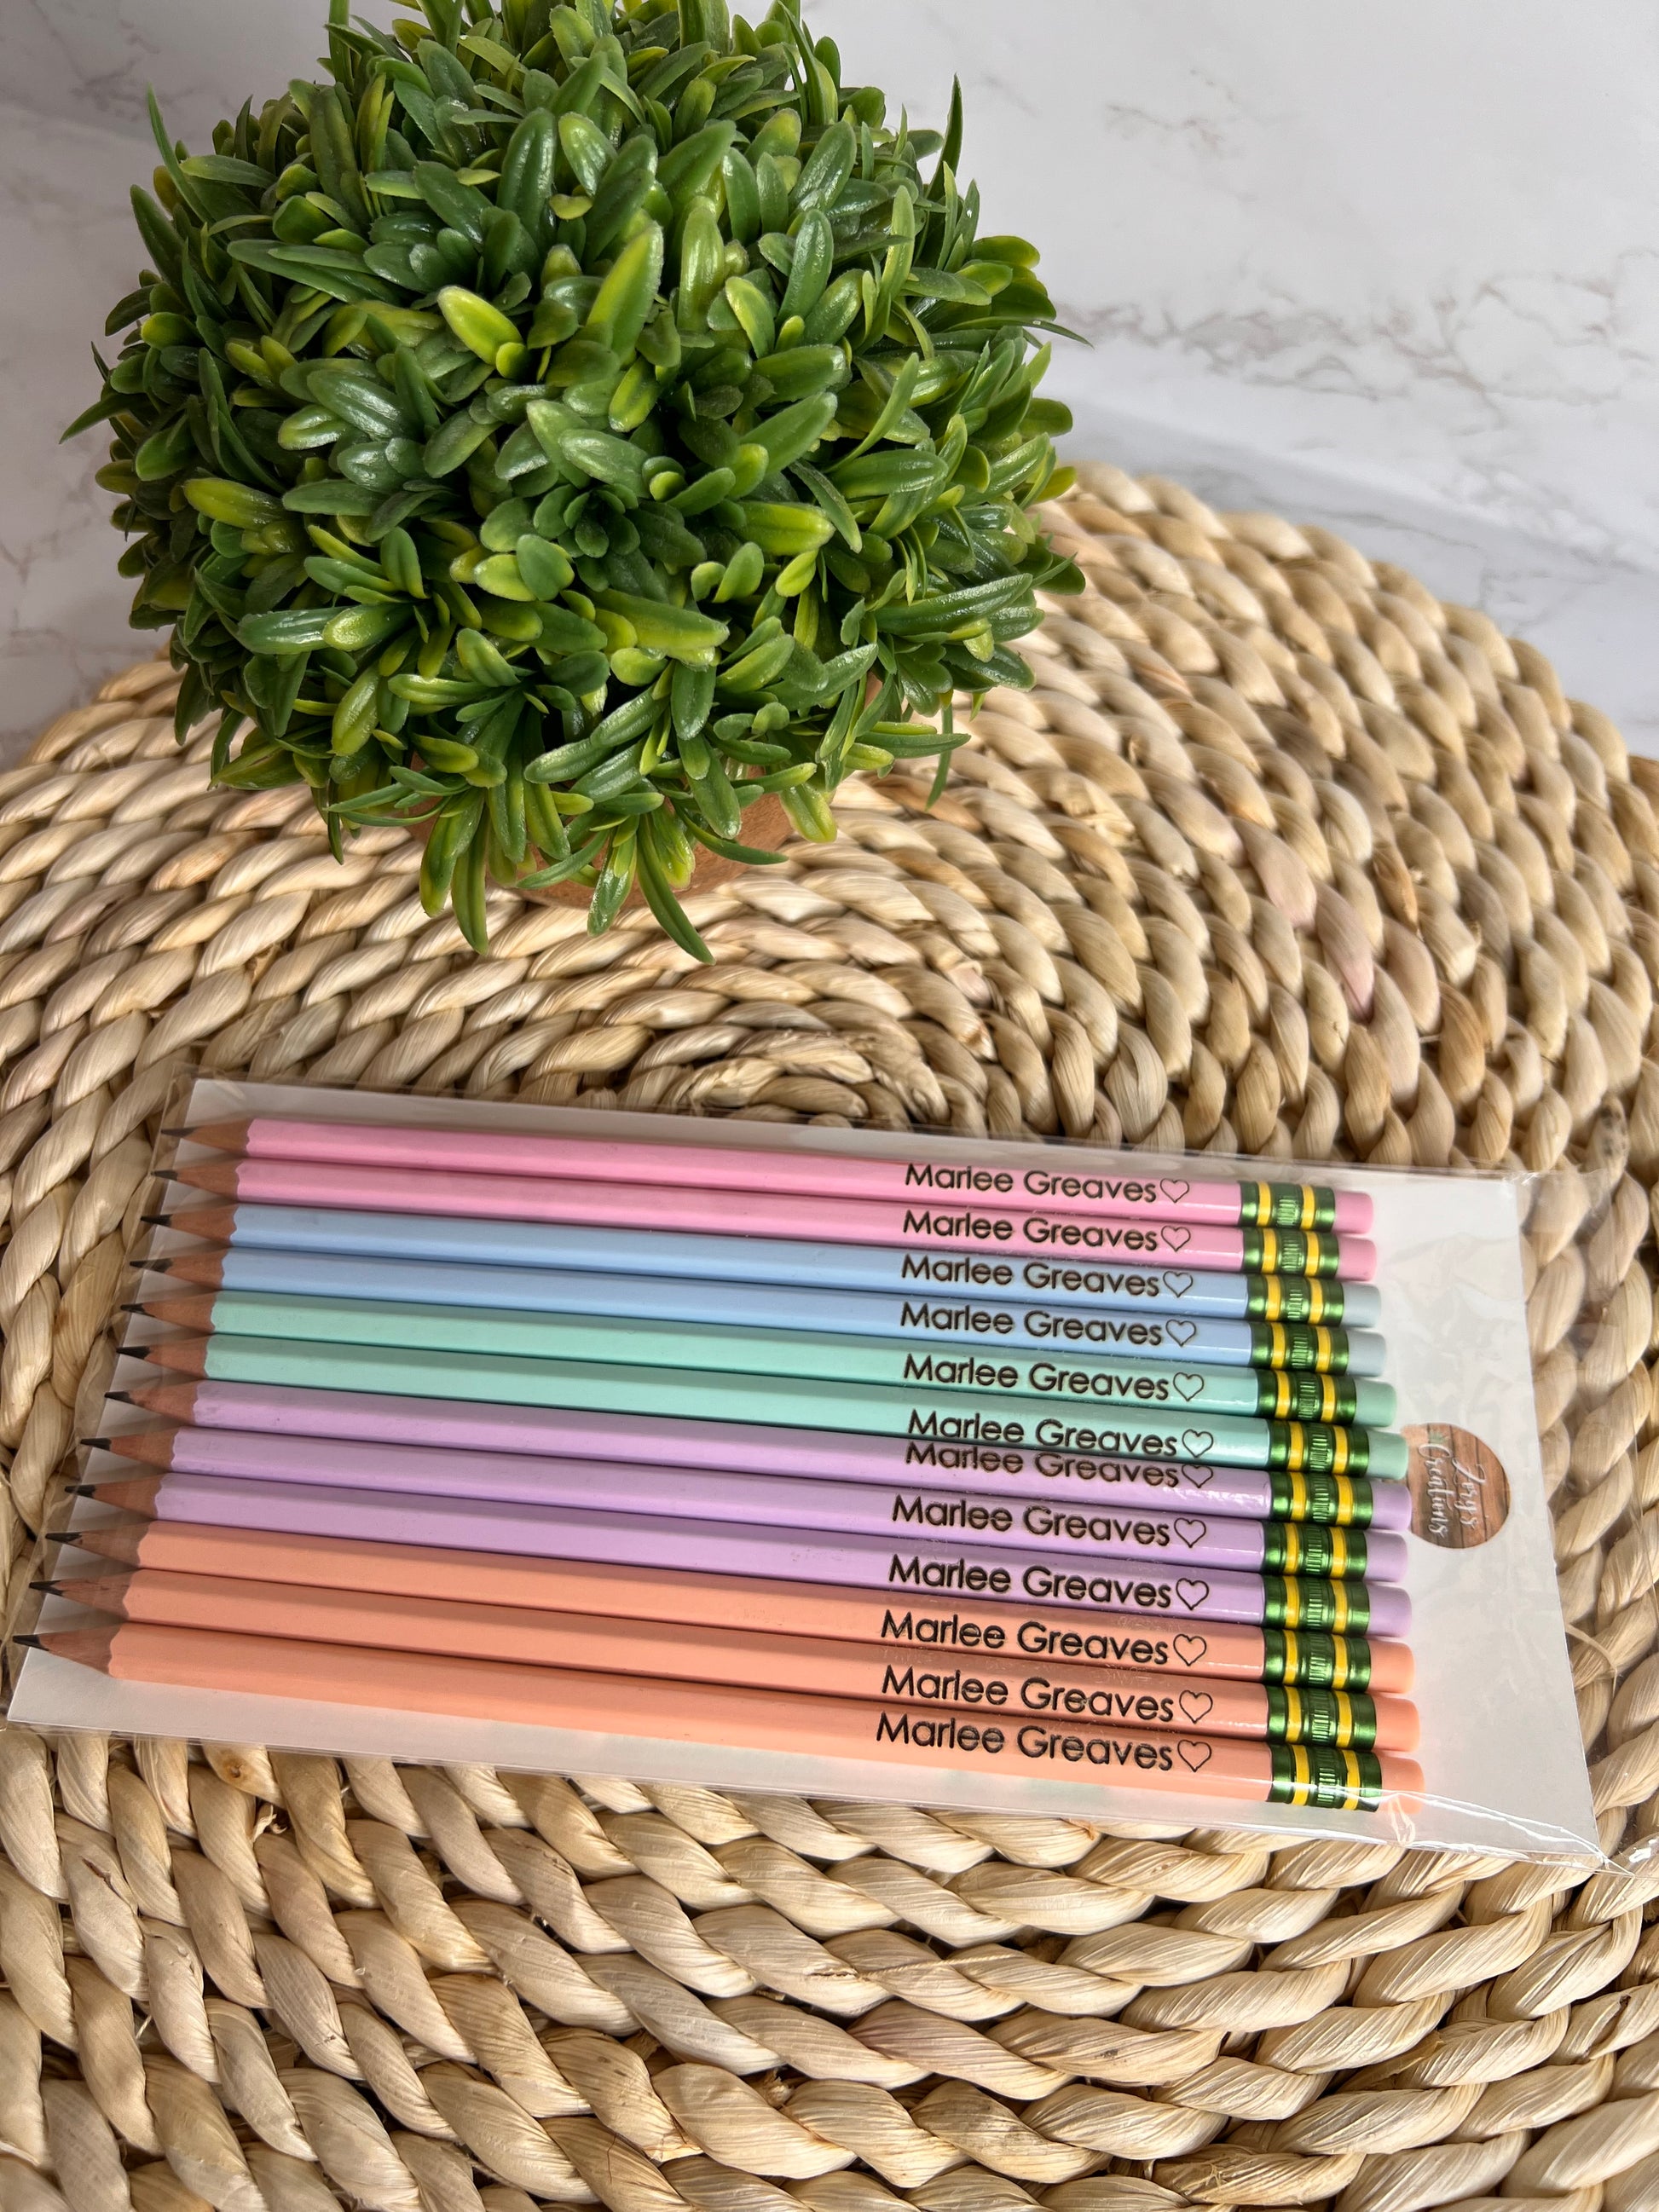 Personalized Laser Engraved Ticonderoga Pencil Teacher Student Special Gift  Unit Of pack: 1 pencil: Buy Online in the UAE, Price from 49 EAD & Shipping  to Dubai